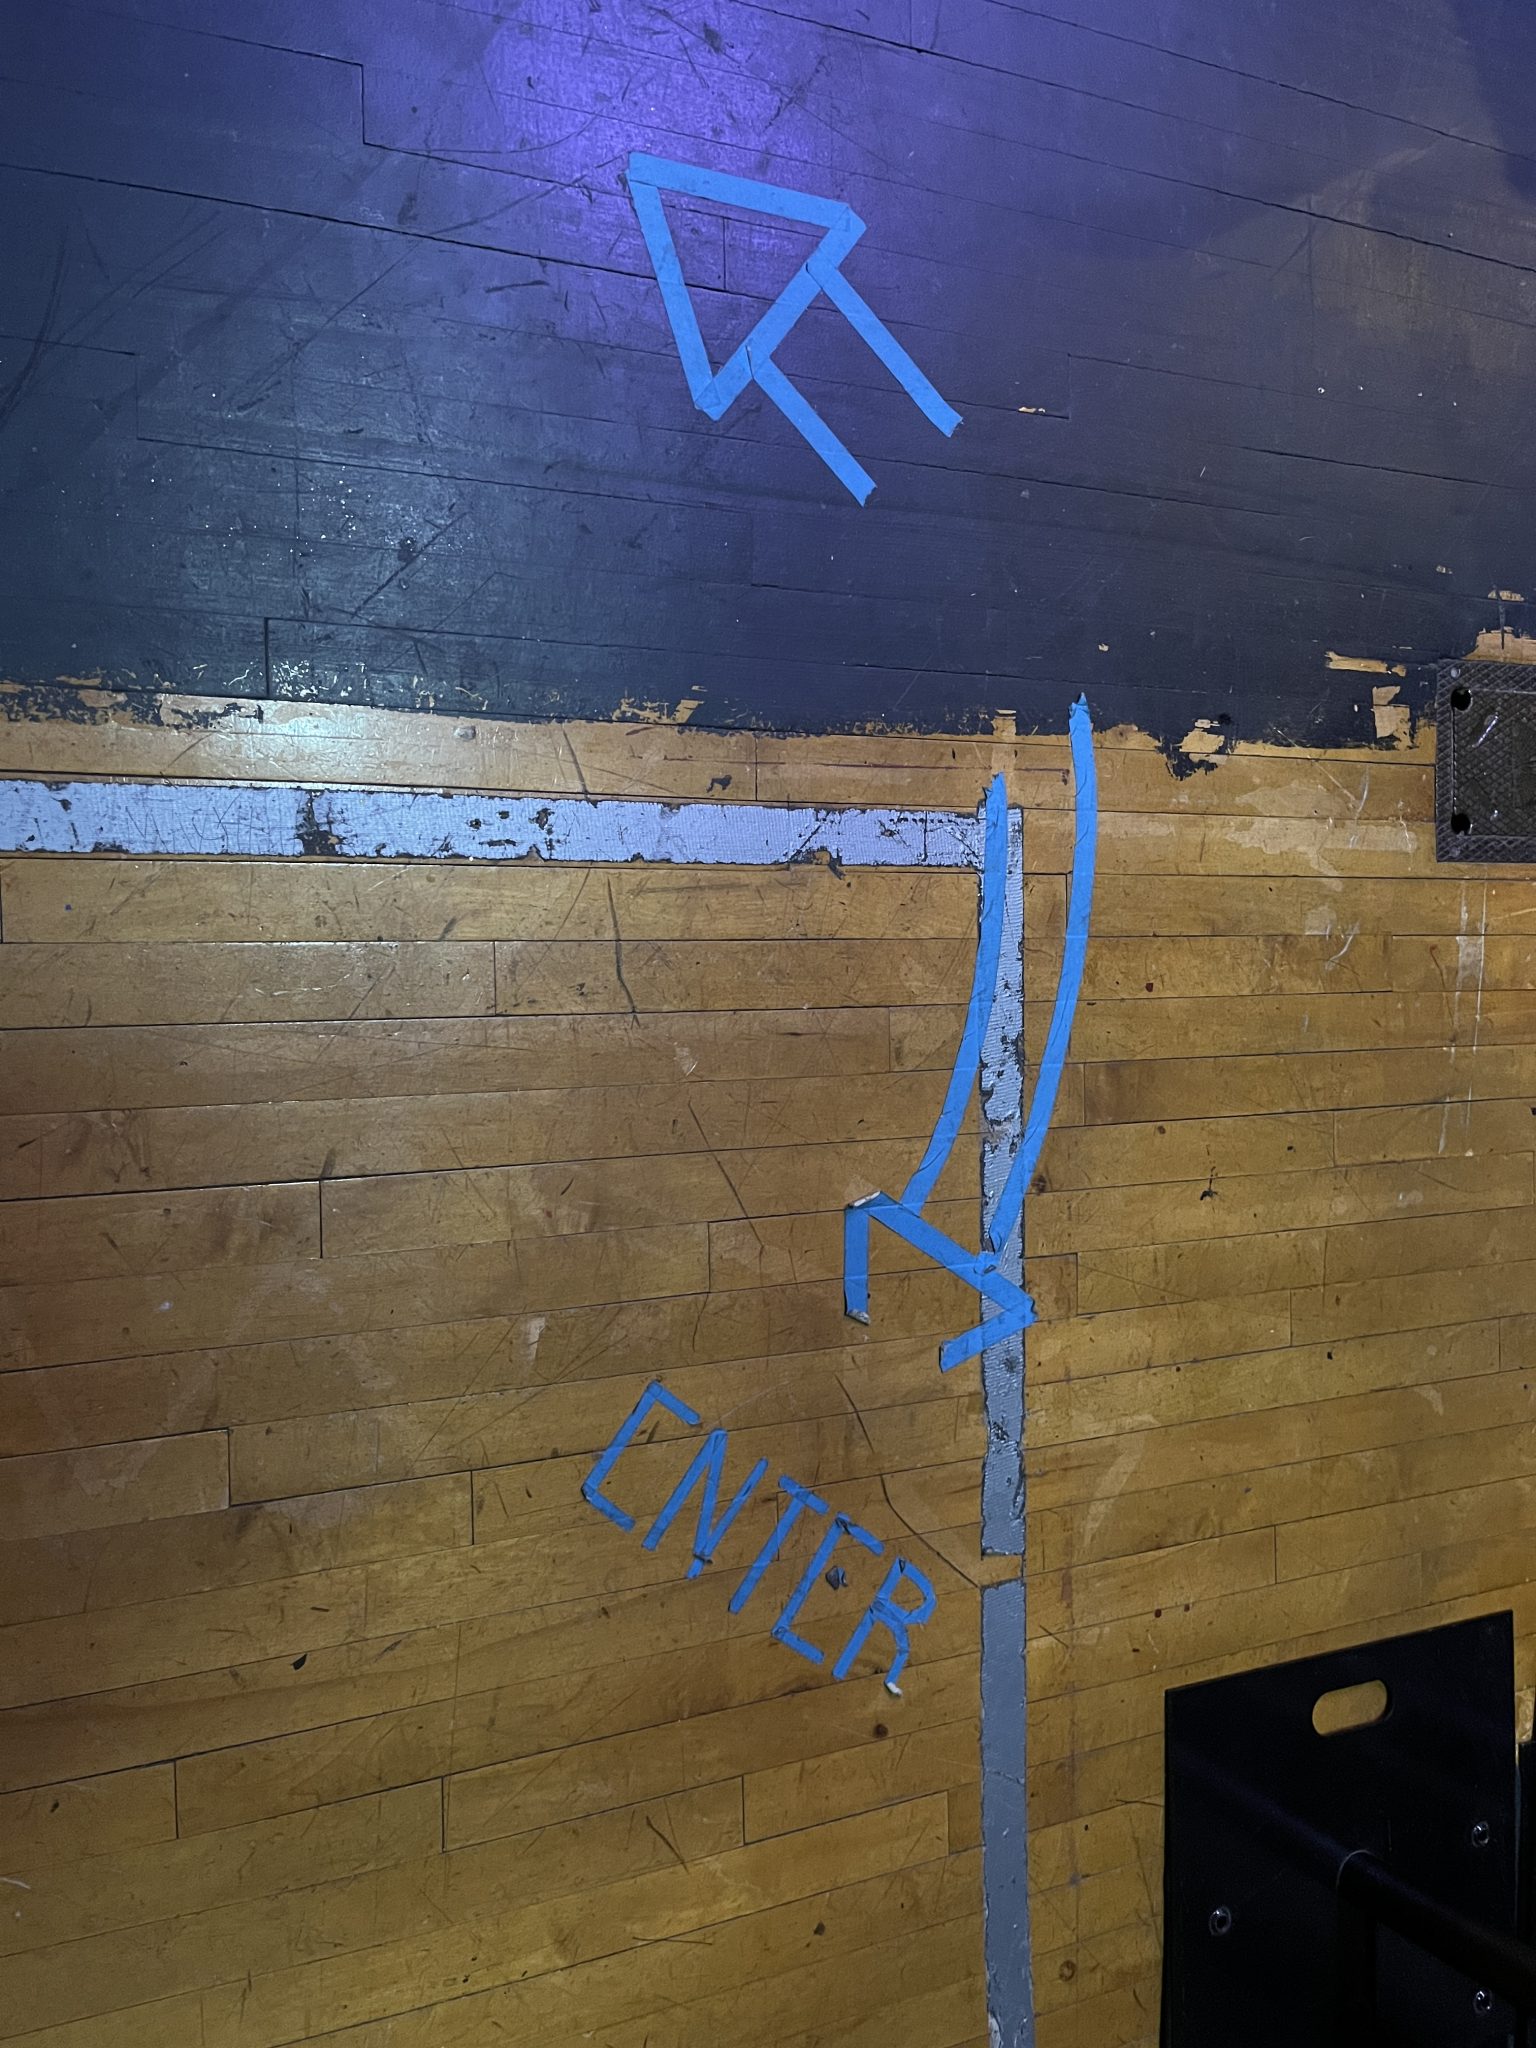 Blue masking tape on a stage floor in the shapes of arrows to direct actors.